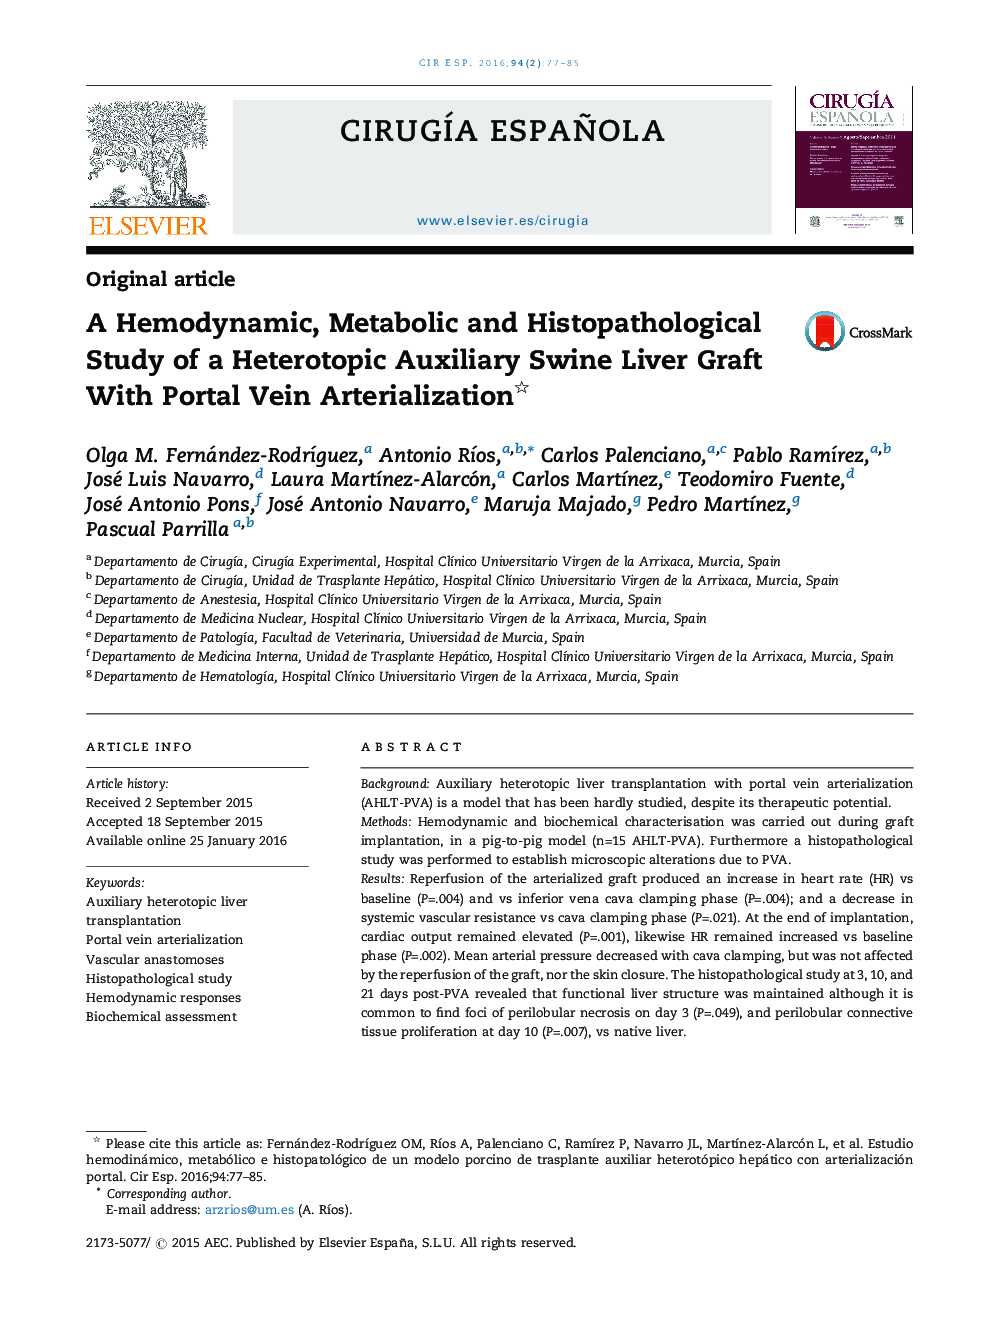 A Hemodynamic, Metabolic and Histopathological Study of a Heterotopic Auxiliary Swine Liver Graft With Portal Vein Arterialization 